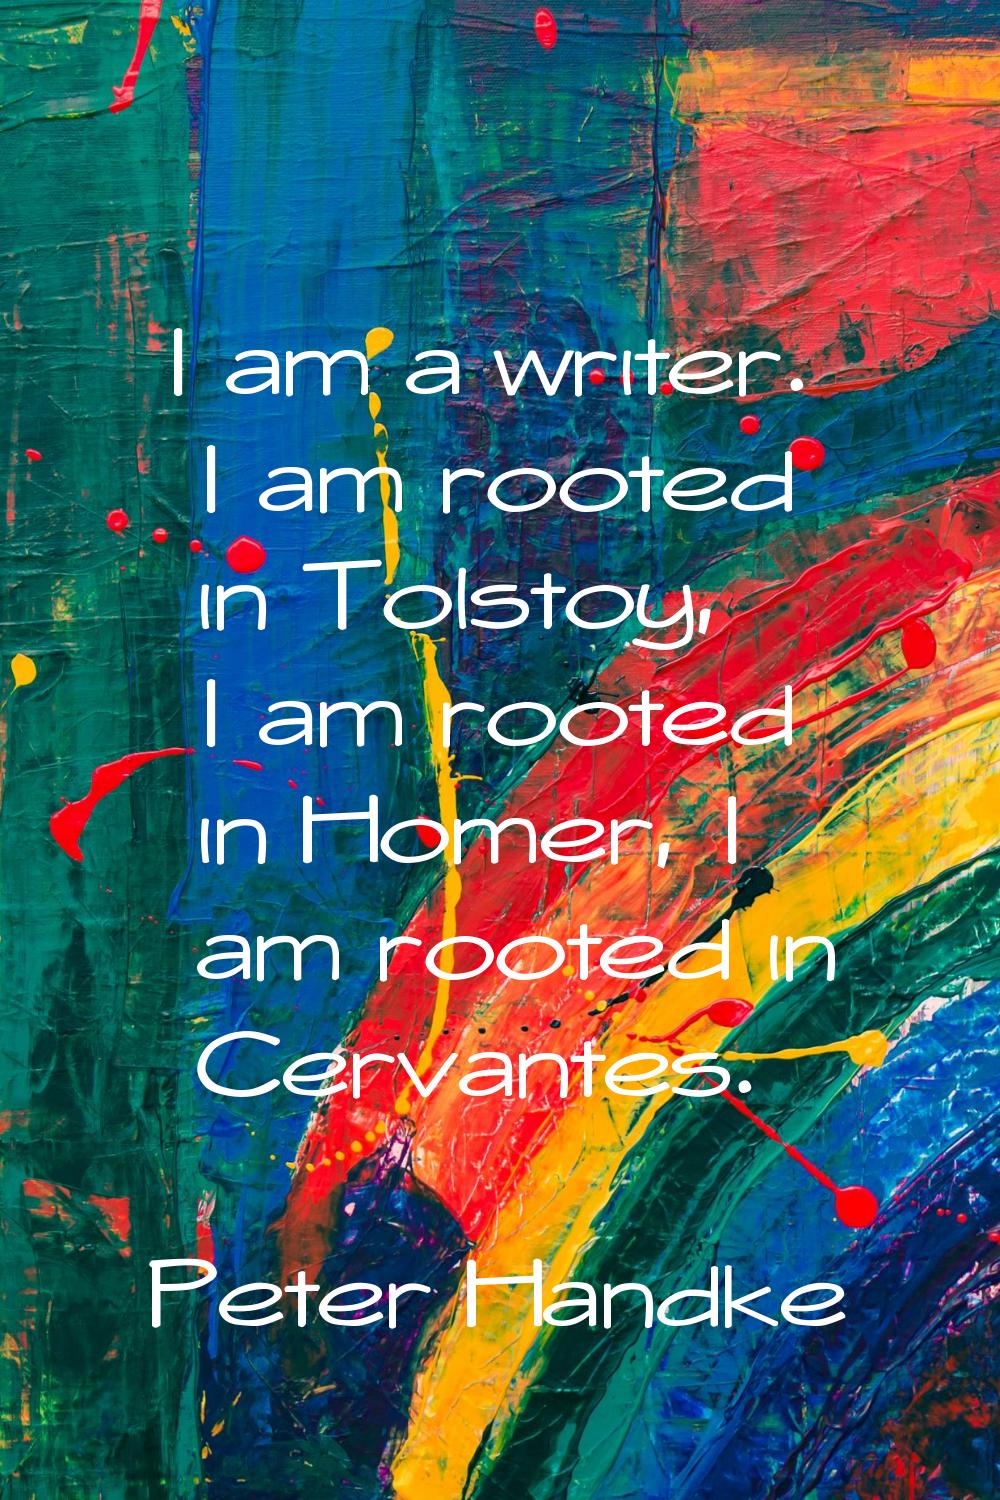 I am a writer. I am rooted in Tolstoy, I am rooted in Homer, I am rooted in Cervantes.